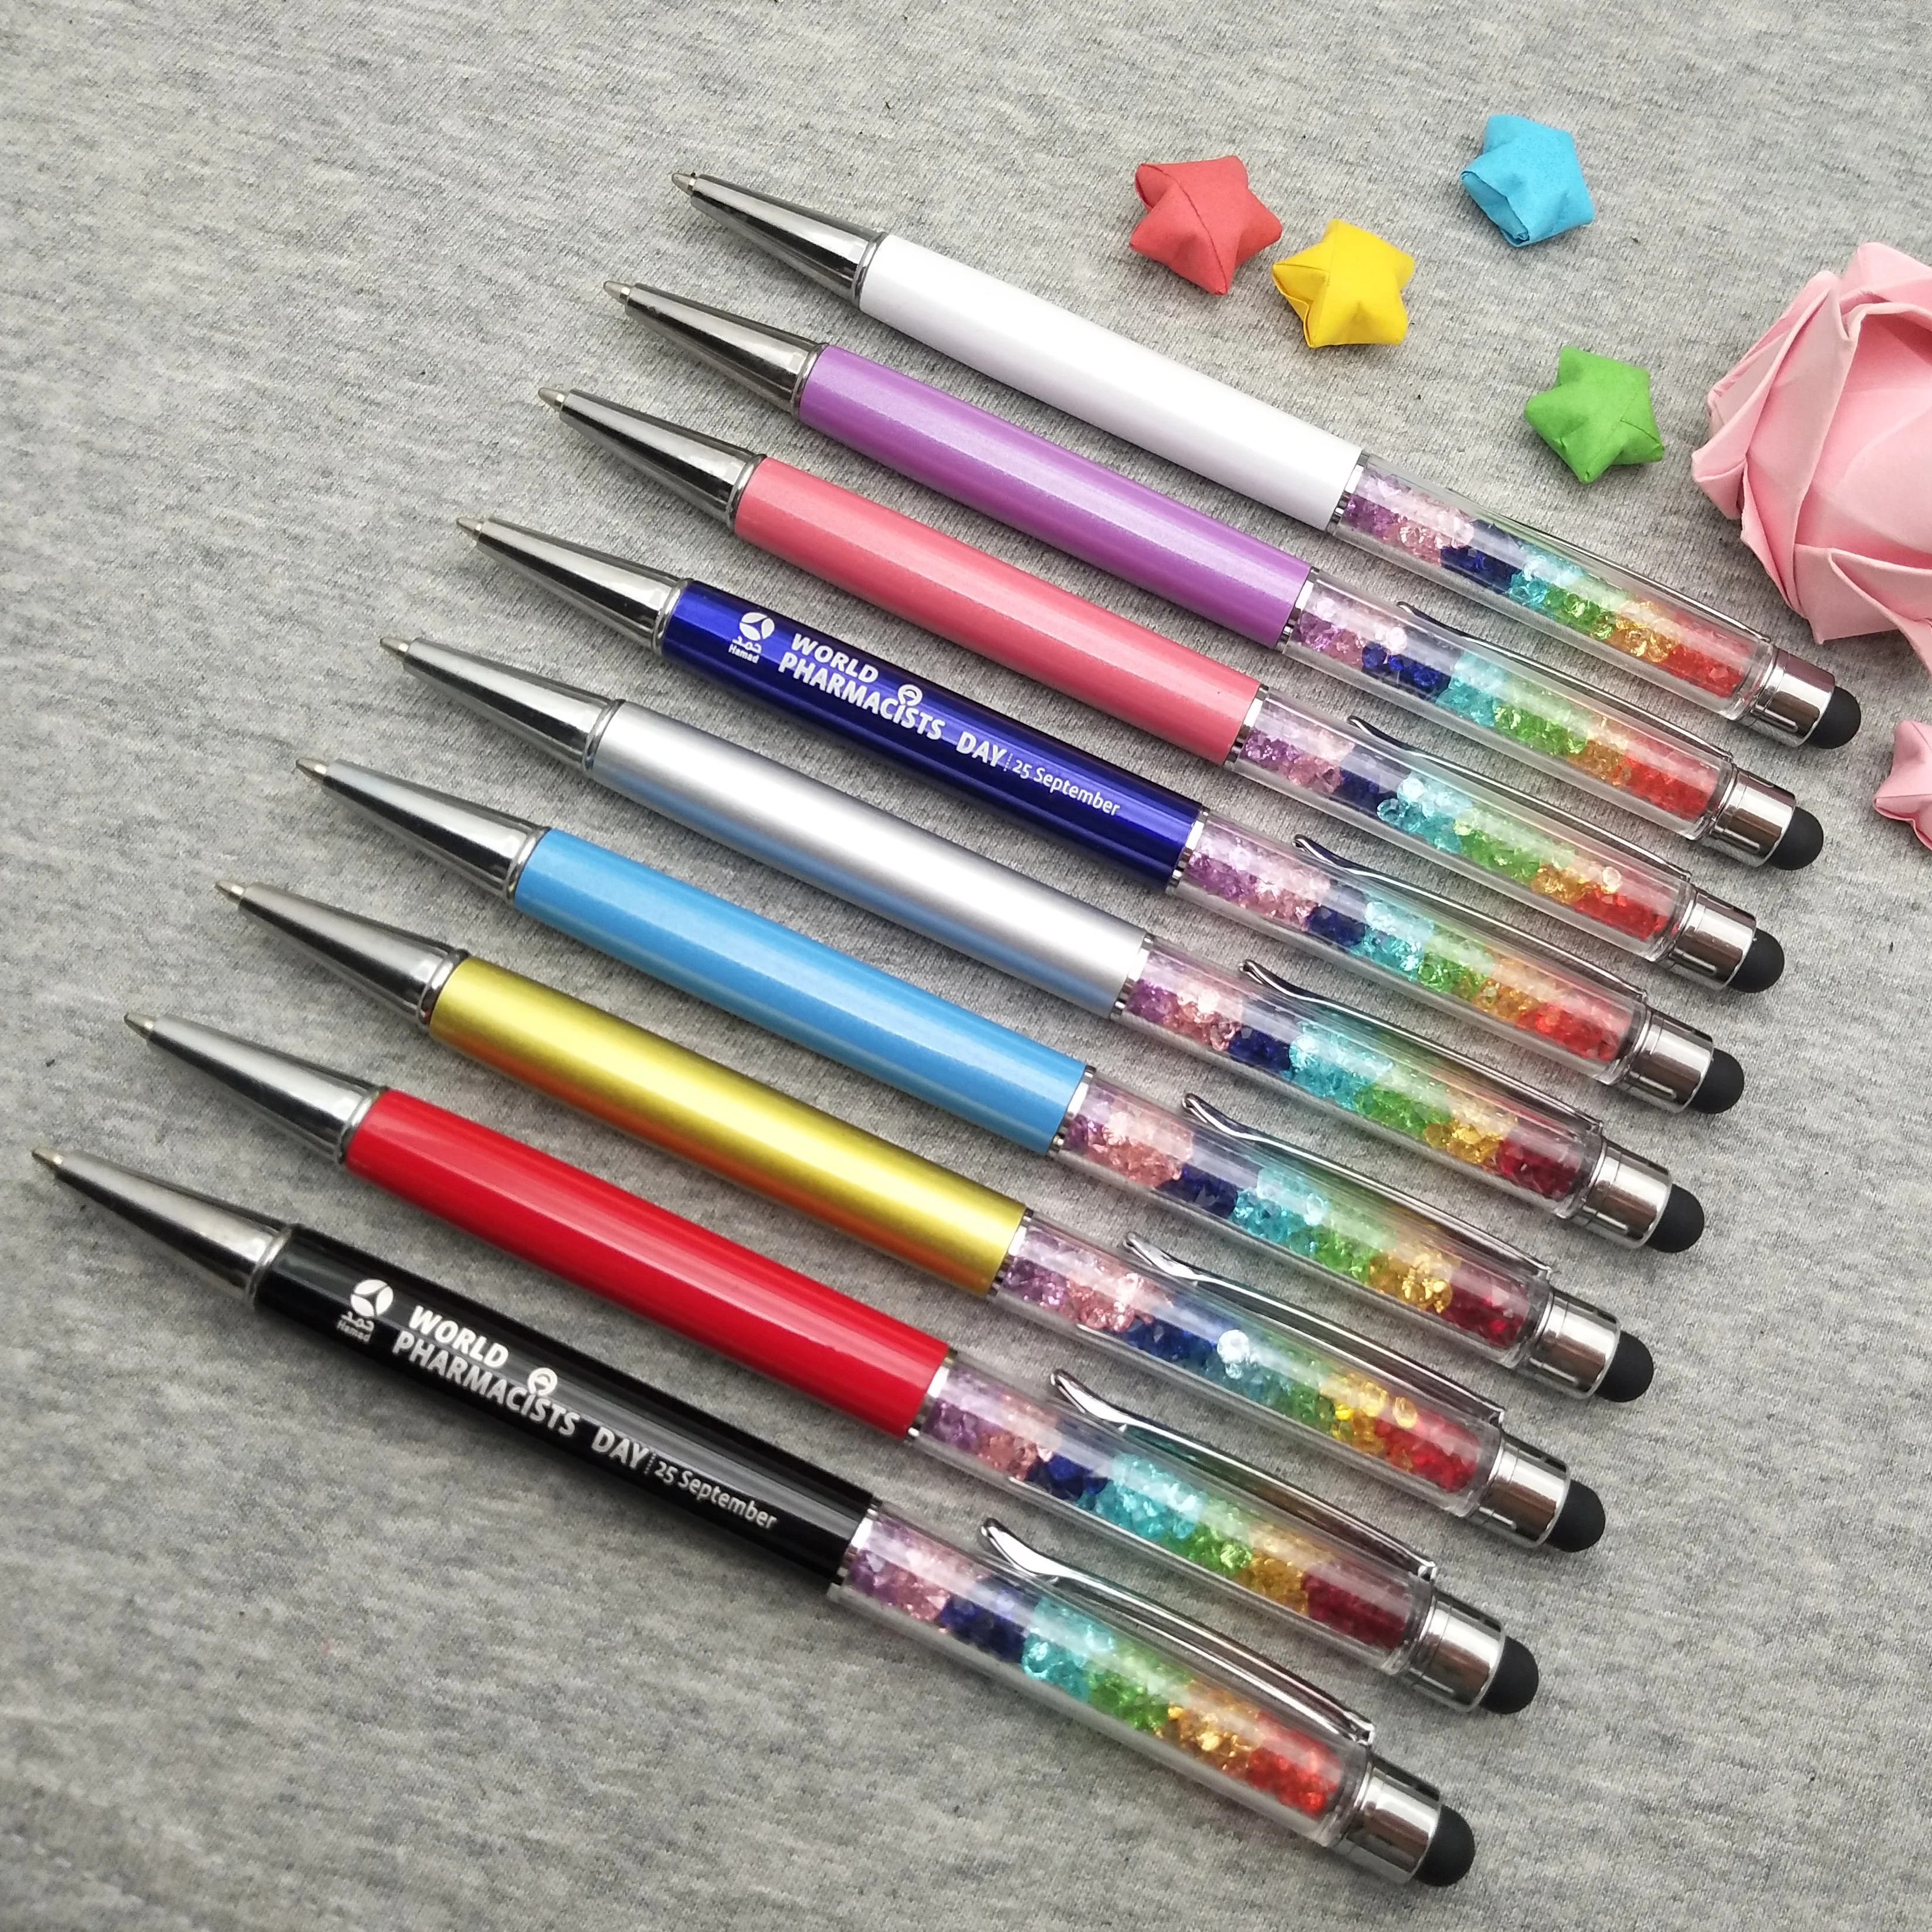 NEW rainbow crystal stylus pencils custom imprinted with your logo/text/weburl/email by laser 100pcs a lot